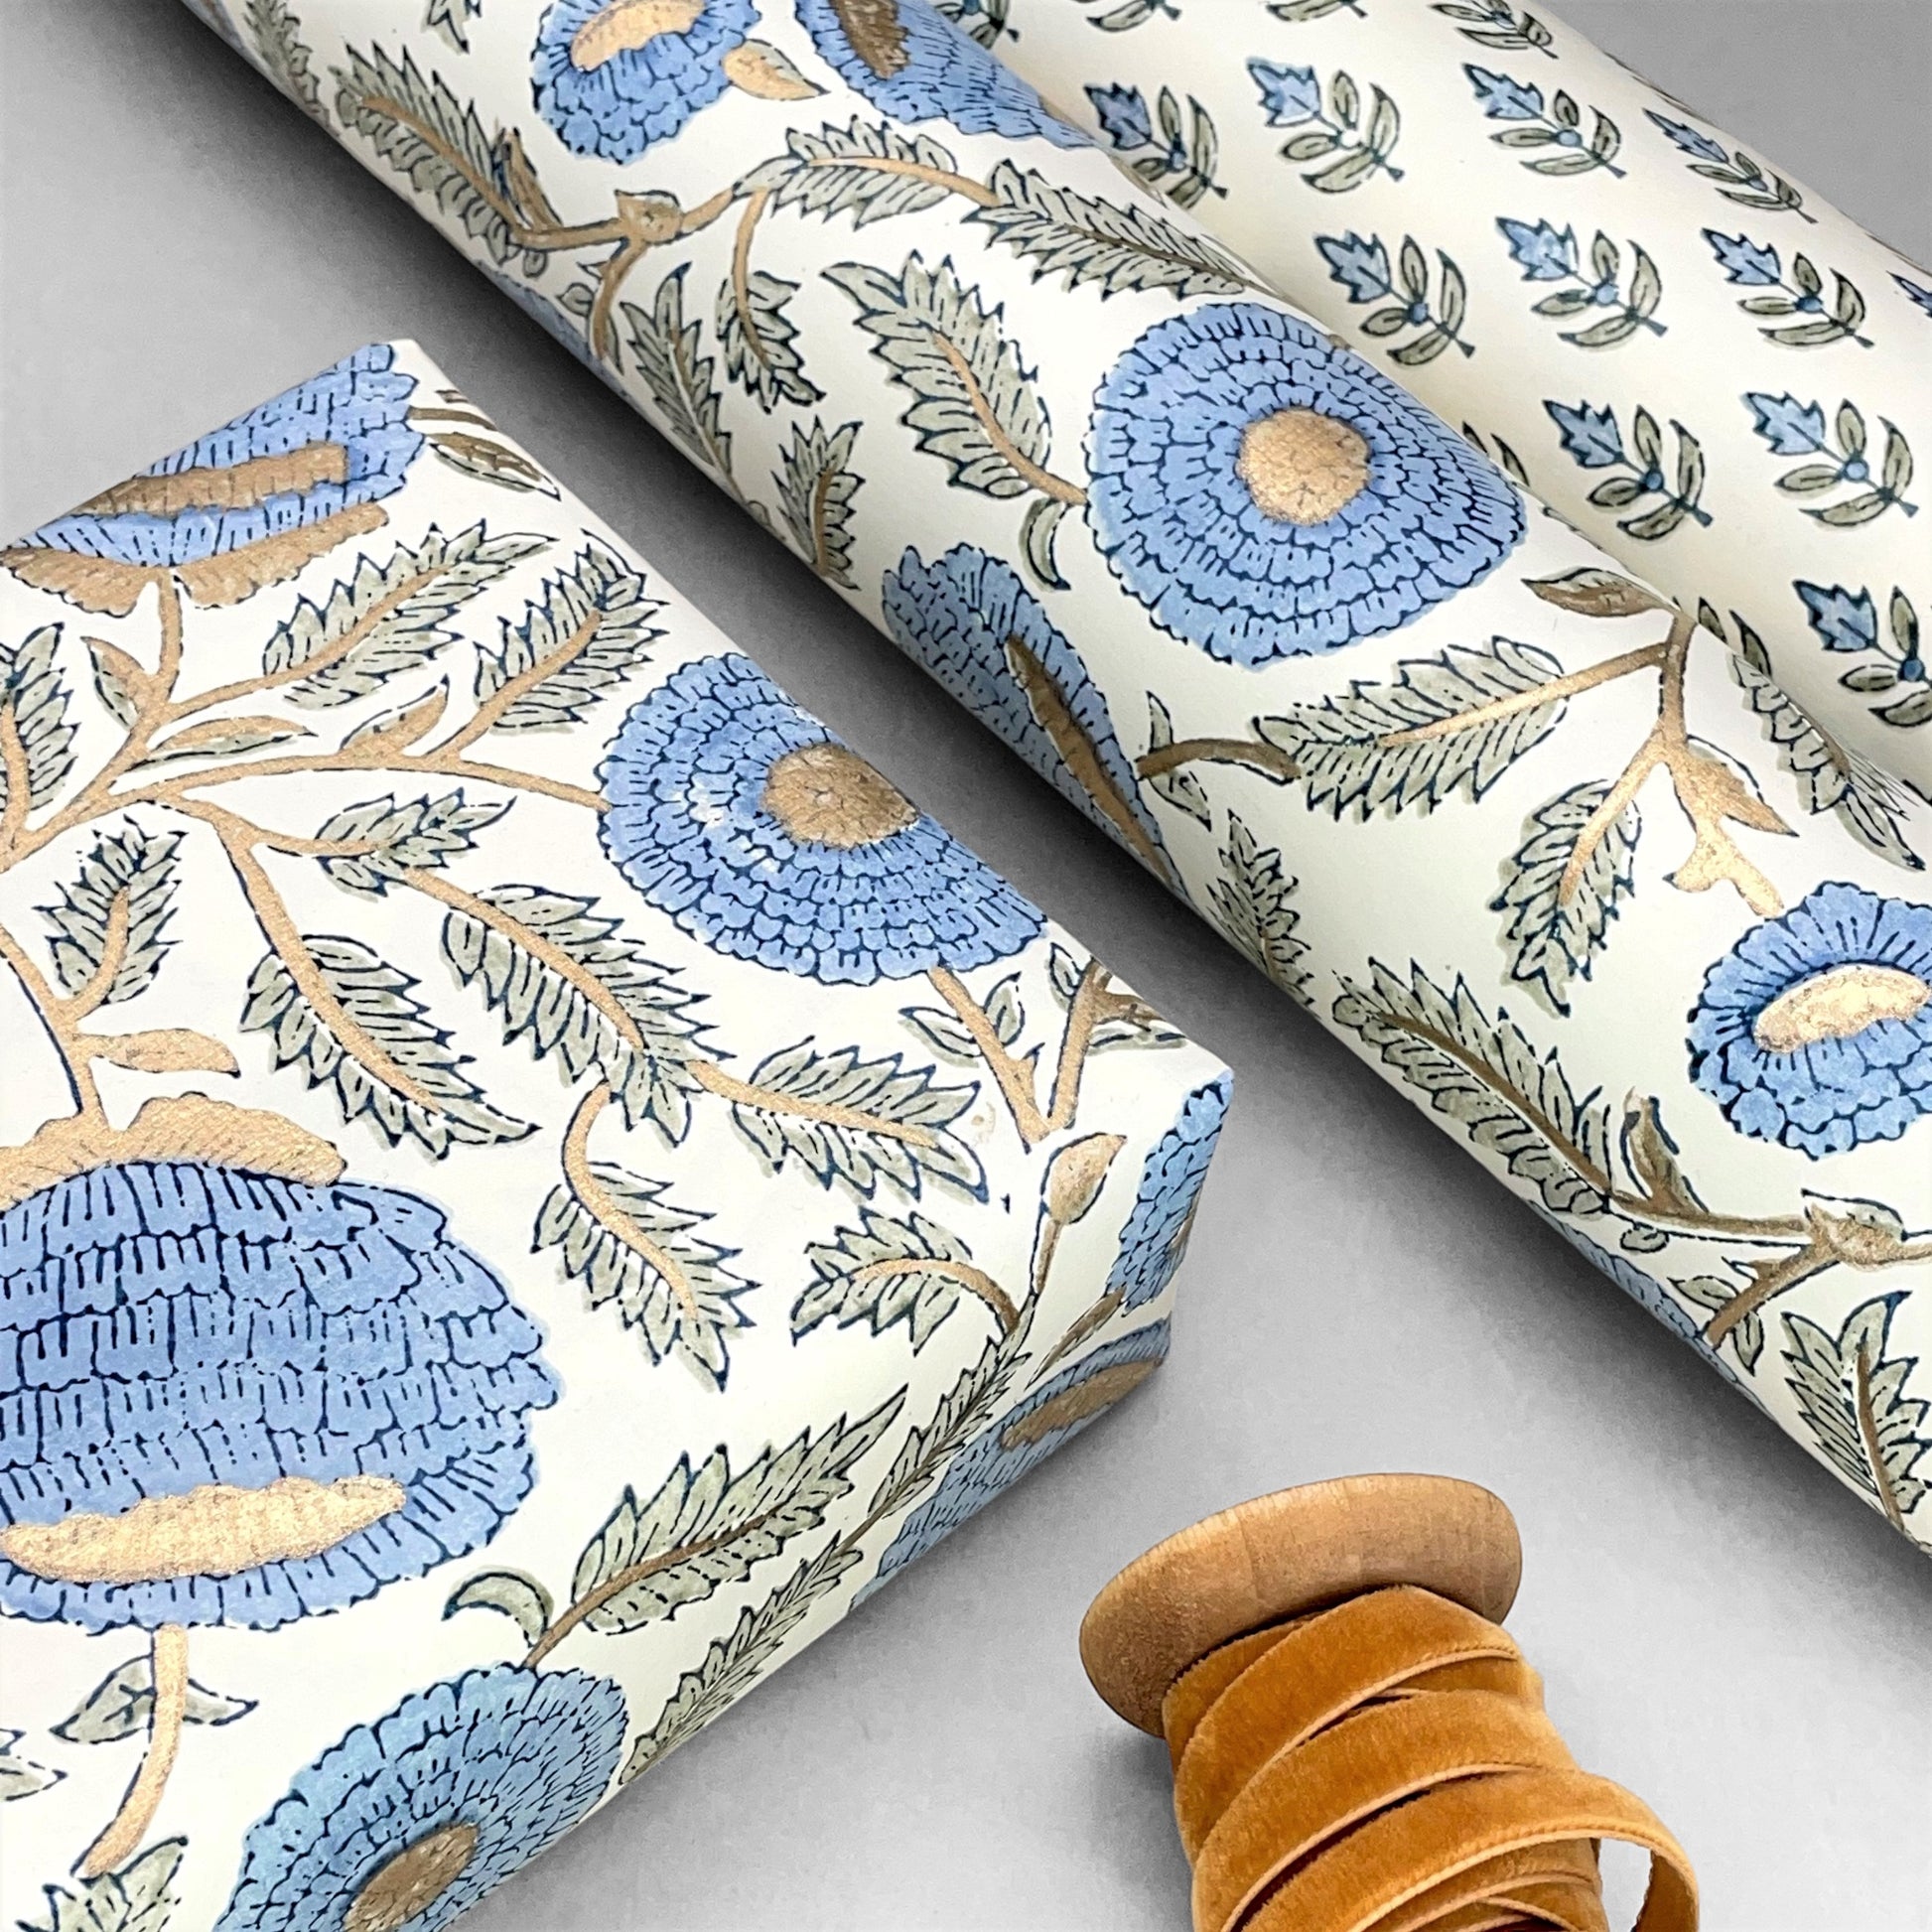 wrapping paper with repeat botanical pattern in blue, gold and green by Paper Mirchi